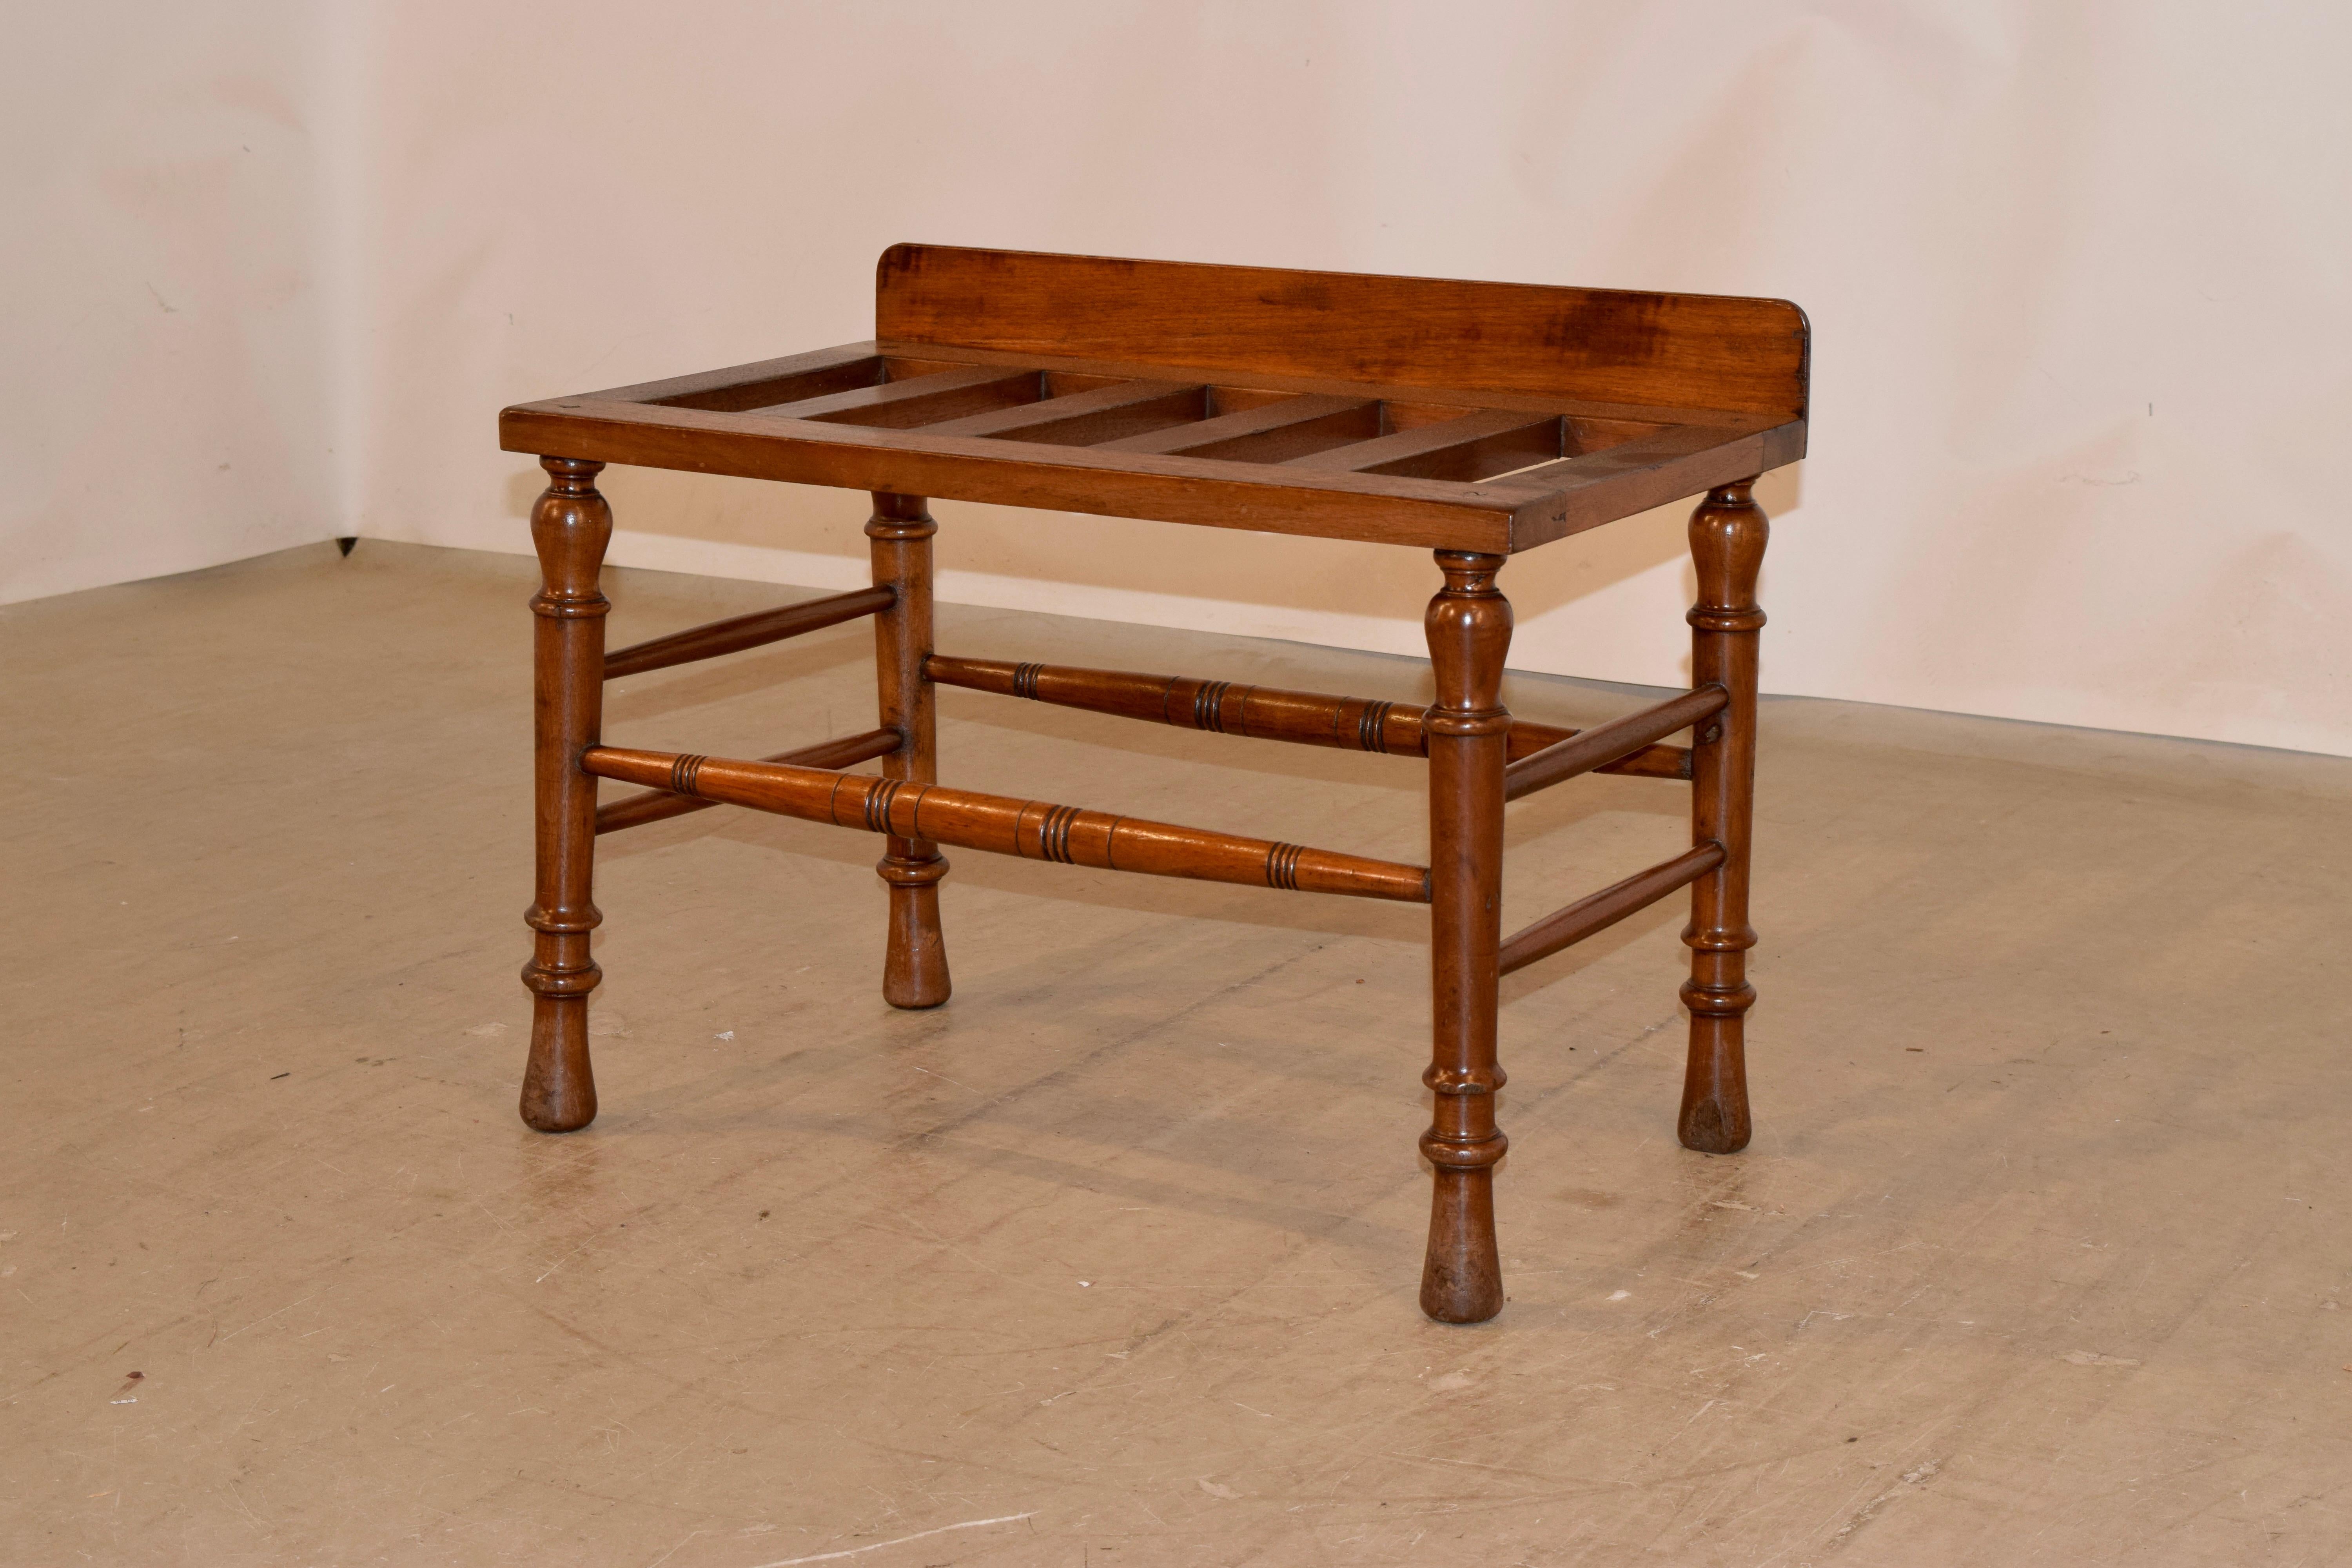 English 19th Century Mahogany Luggage Stand For Sale